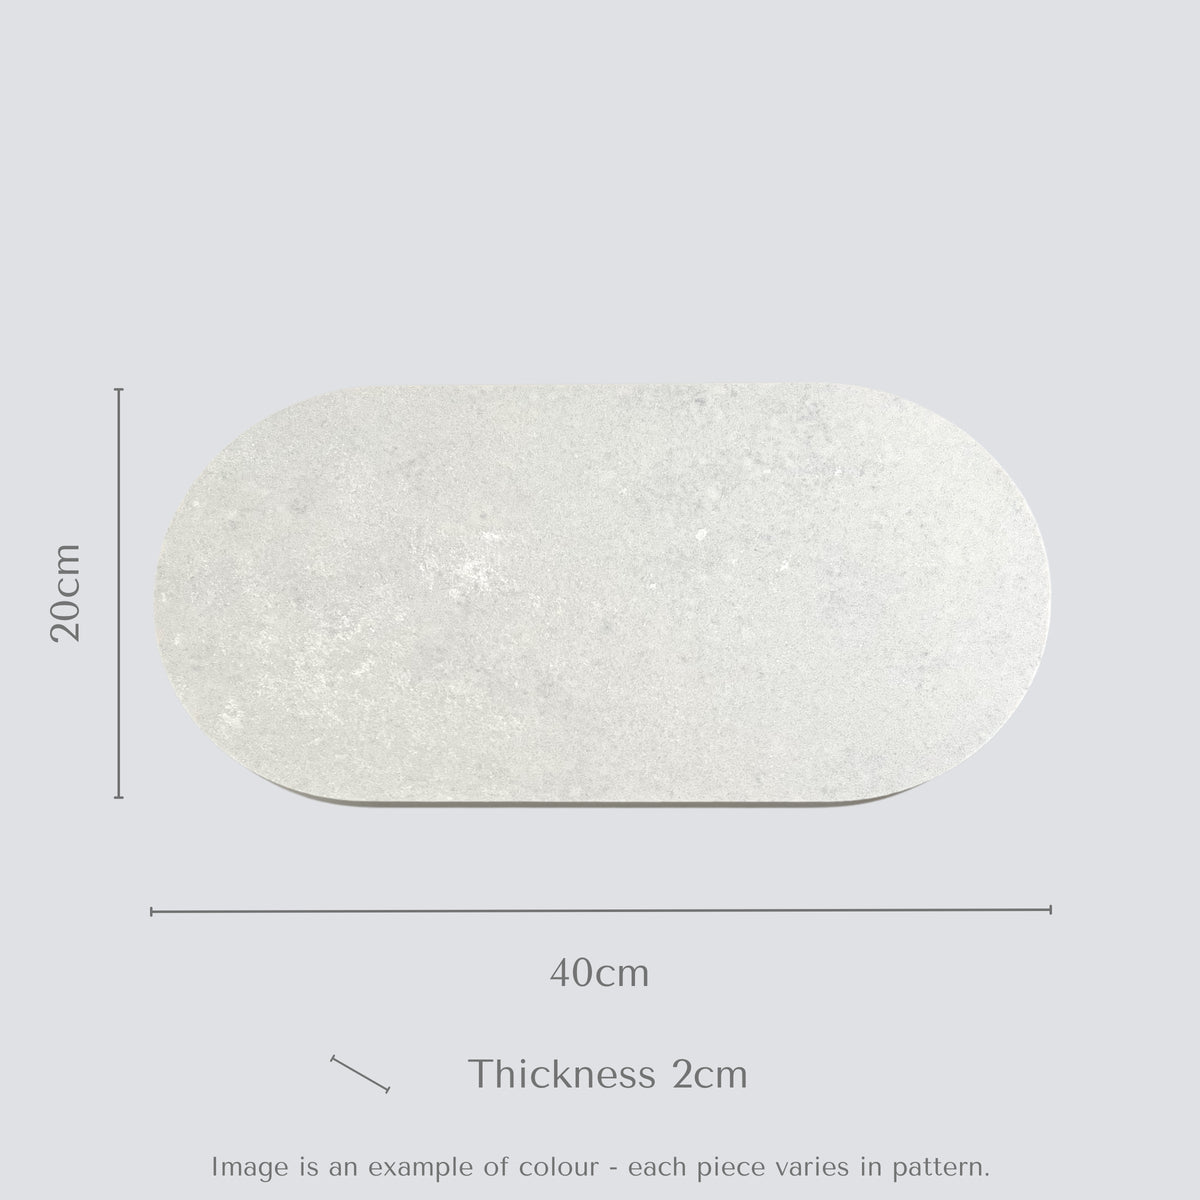 Double arch quartz serving platter in Caesarstone Airy Concrete™ created by Aureliia Collection. Unstyled food platter shows product concrete look with the feel of concrete in full movement. An excellent home decor gift for someone who has it all.